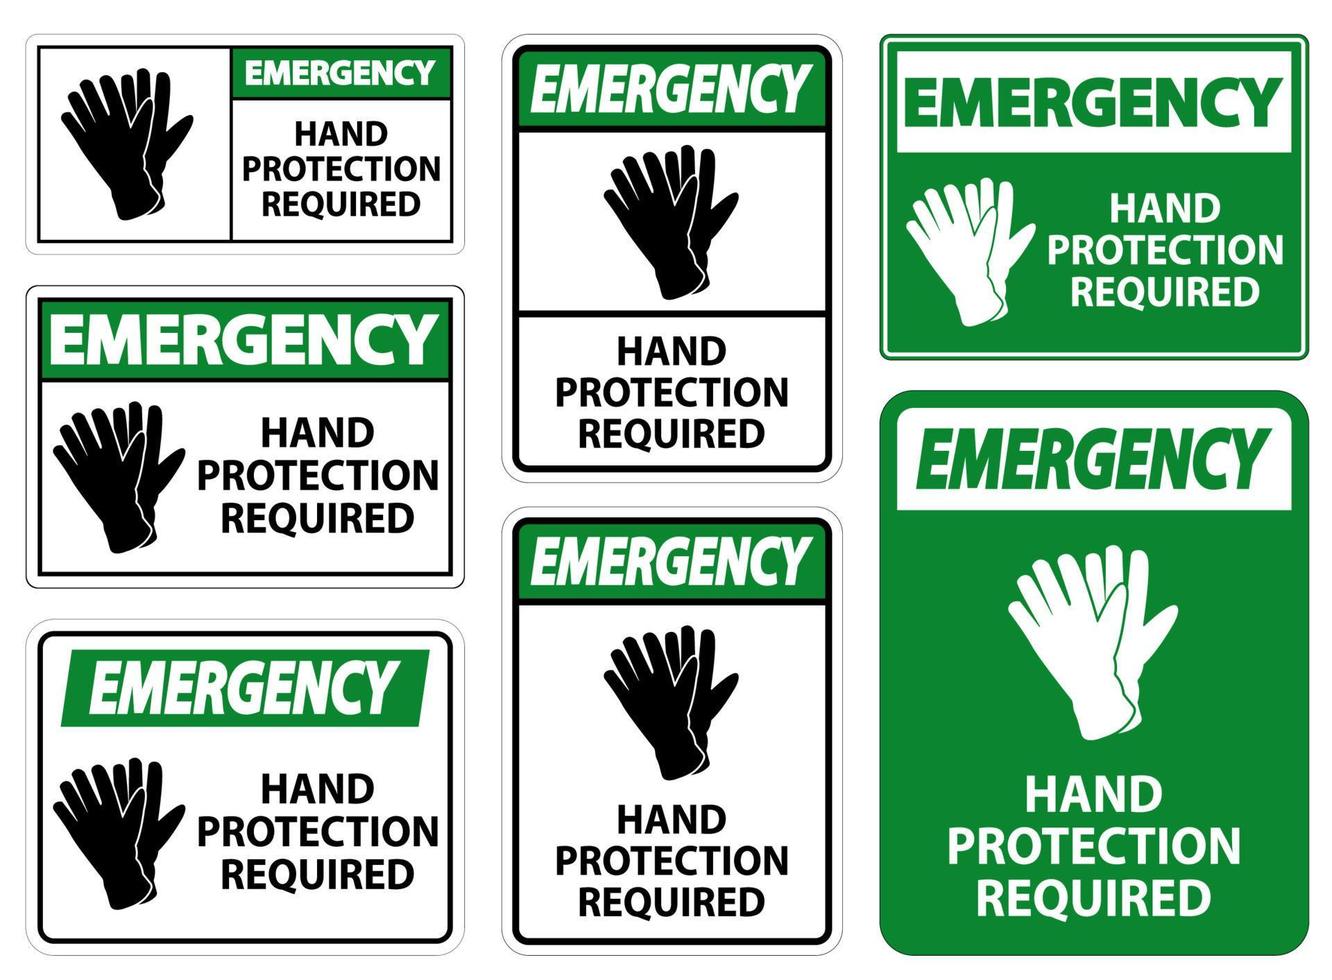 Emergency Hand Protection Required Sign on white background vector